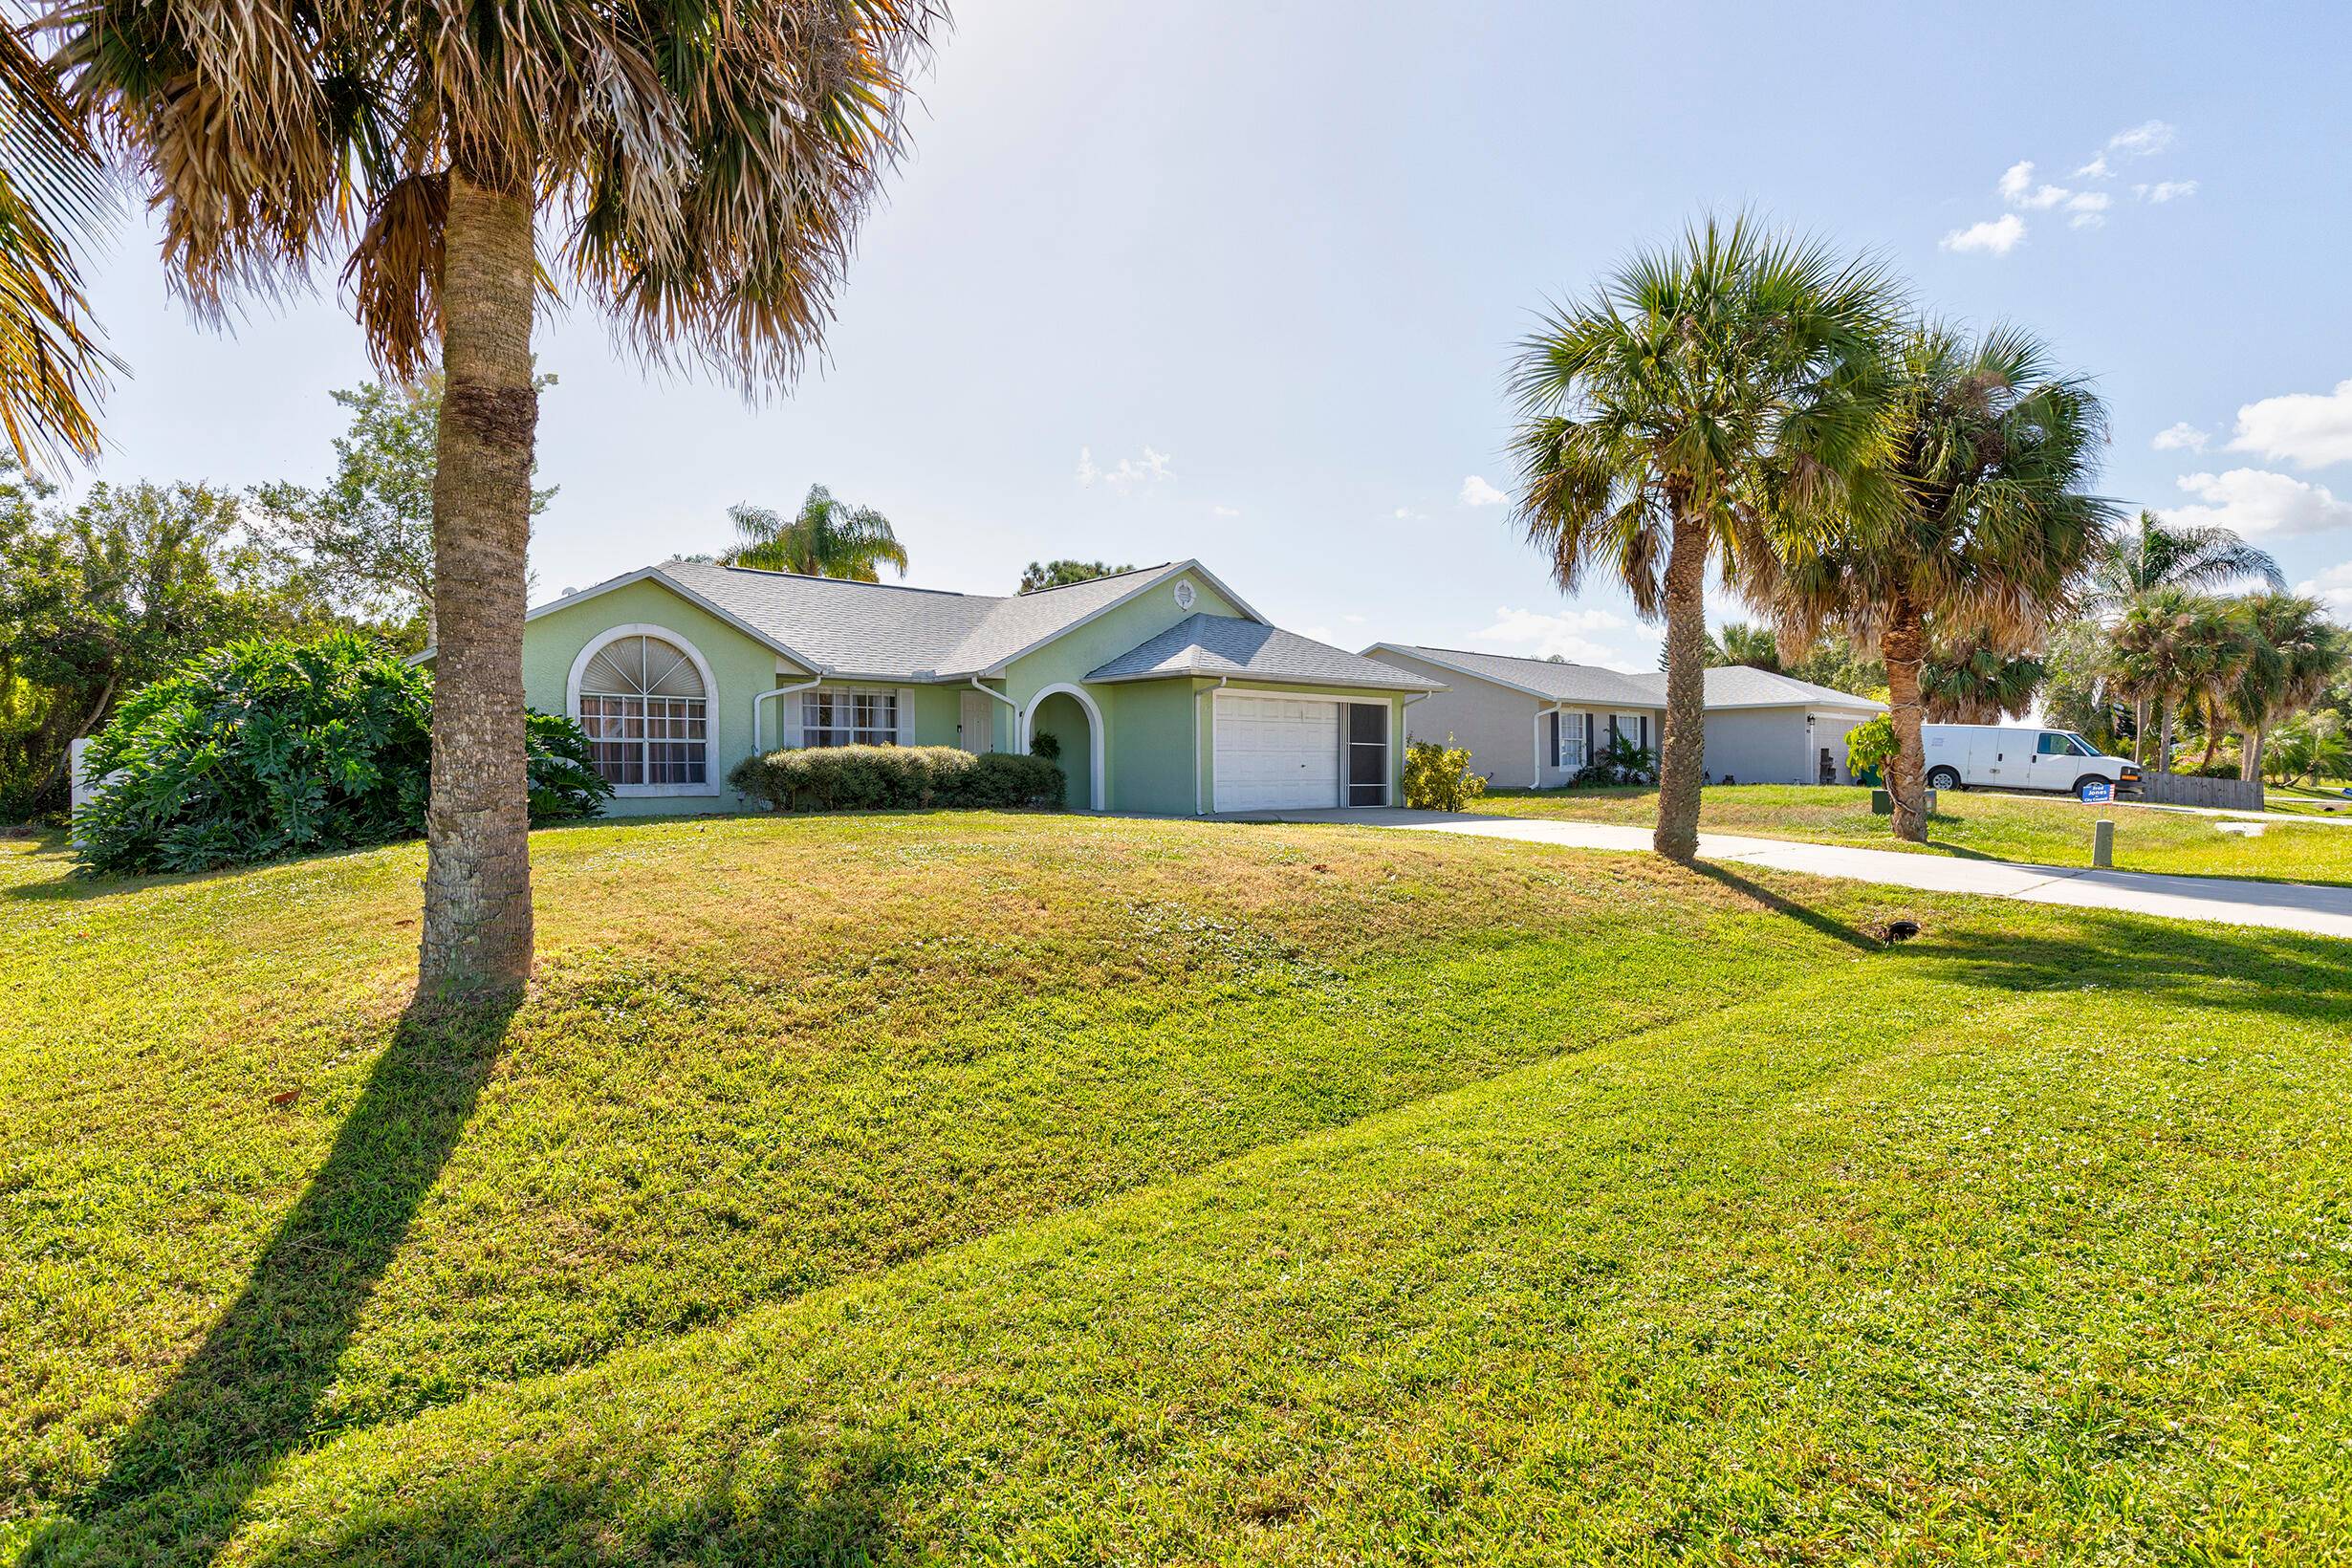 Charming 3 bedroom, 2 bathroom, Double door entrance, NO HOA with a formal dining room, and an oversized lot in the heart of Sebastian, Florida.